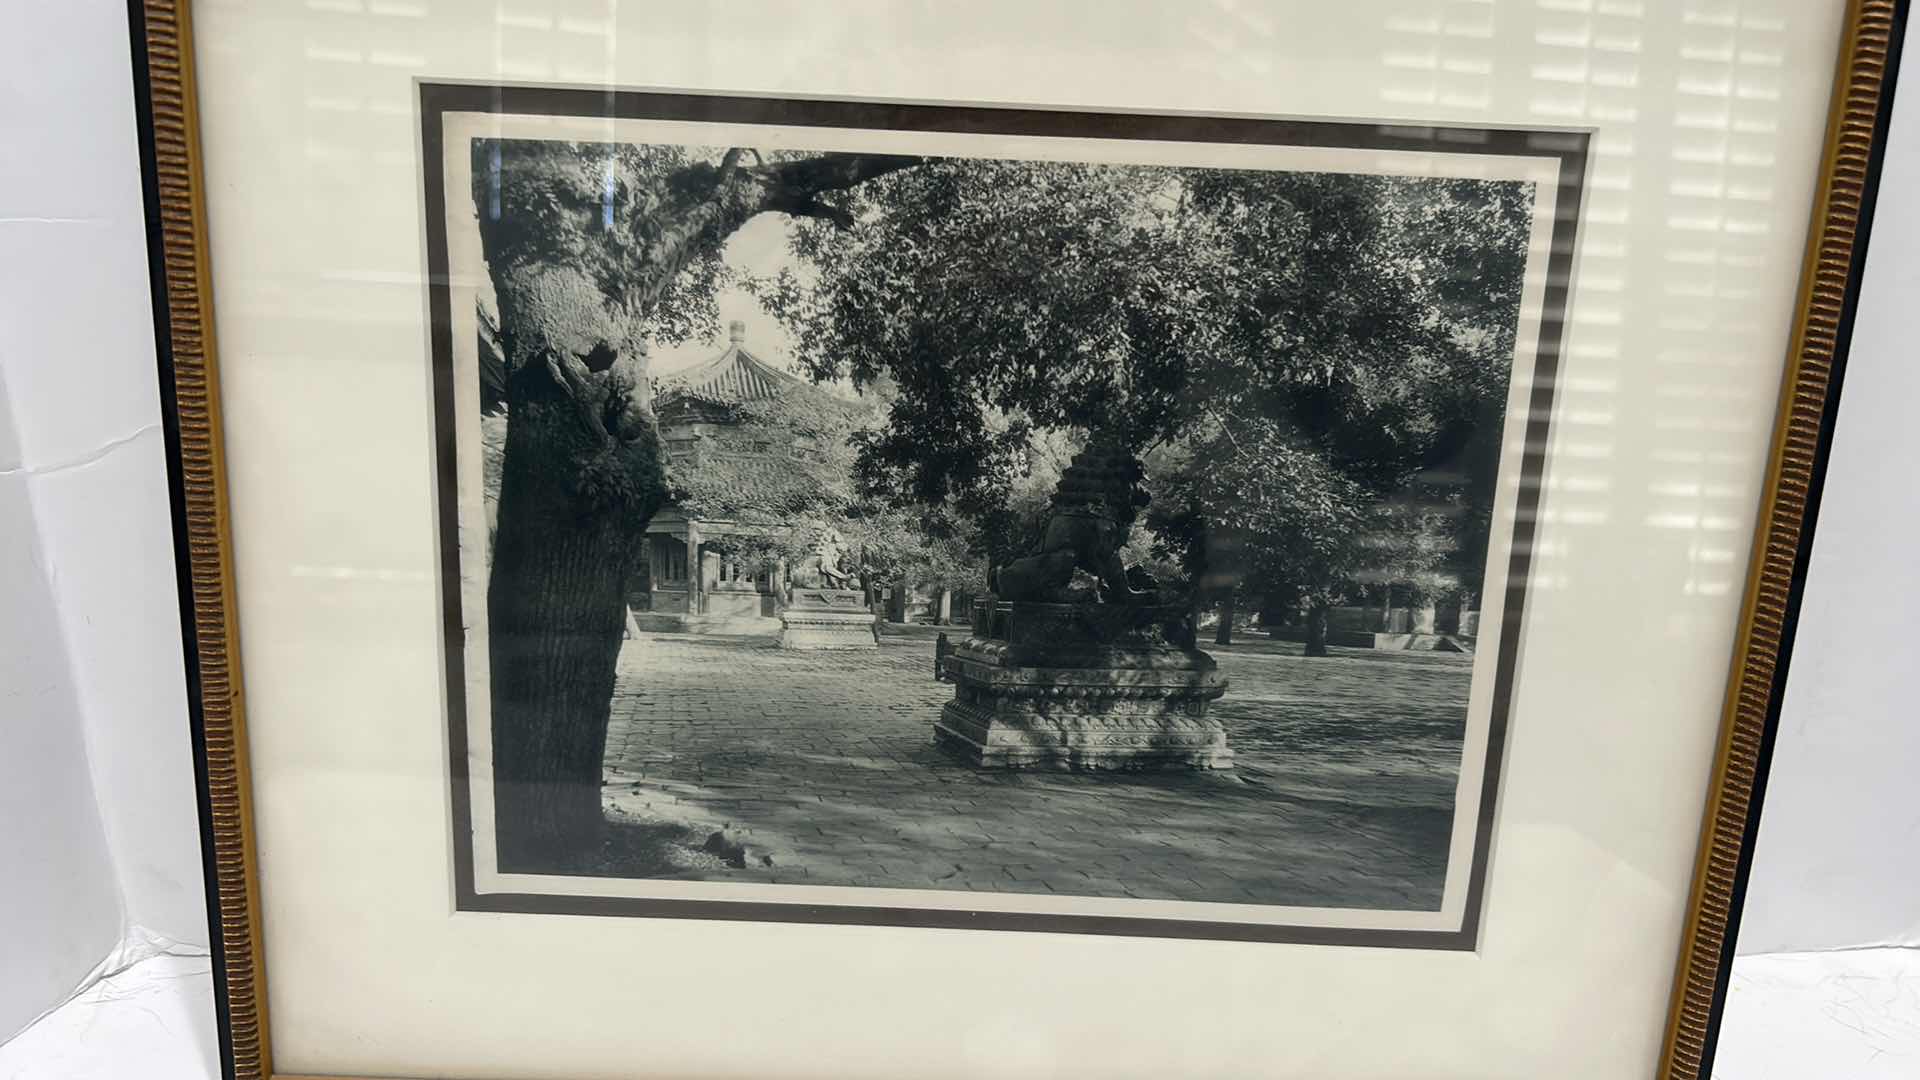 Photo 2 of ORIGIANL PHOTO BY DONALD MENNIE "COURTYARD OF THE LAMA TEMPLE" FRAMED ARTWORK